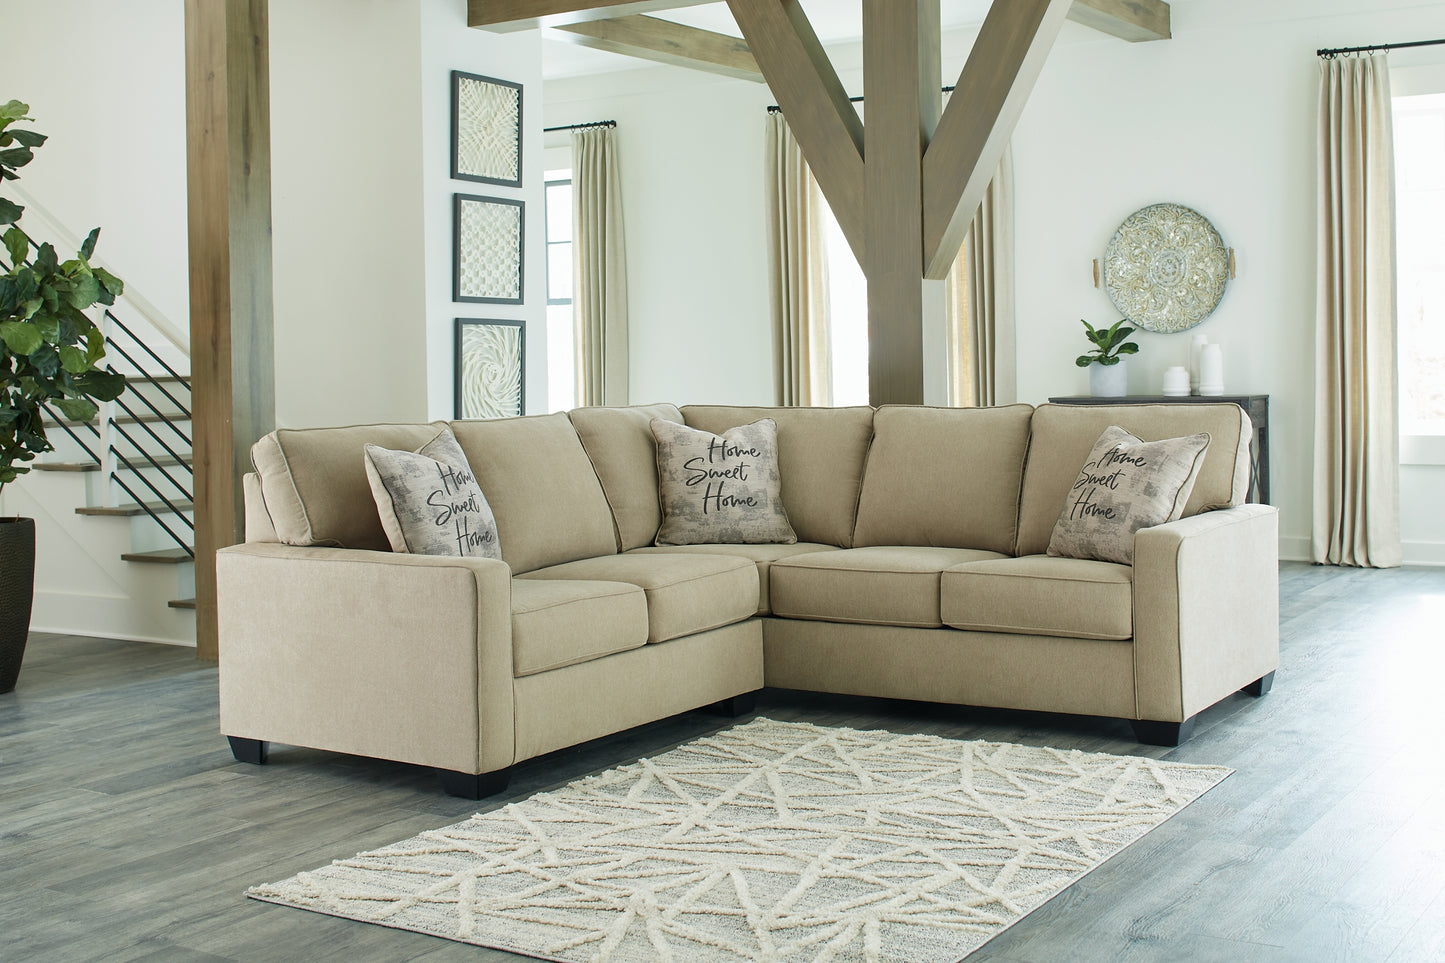 Lucina 2-Piece Sectional with Ottoman Wilson Furniture (OH)  in Bridgeport, Ohio. Serving Bridgeport, Yorkville, Bellaire, & Avondale